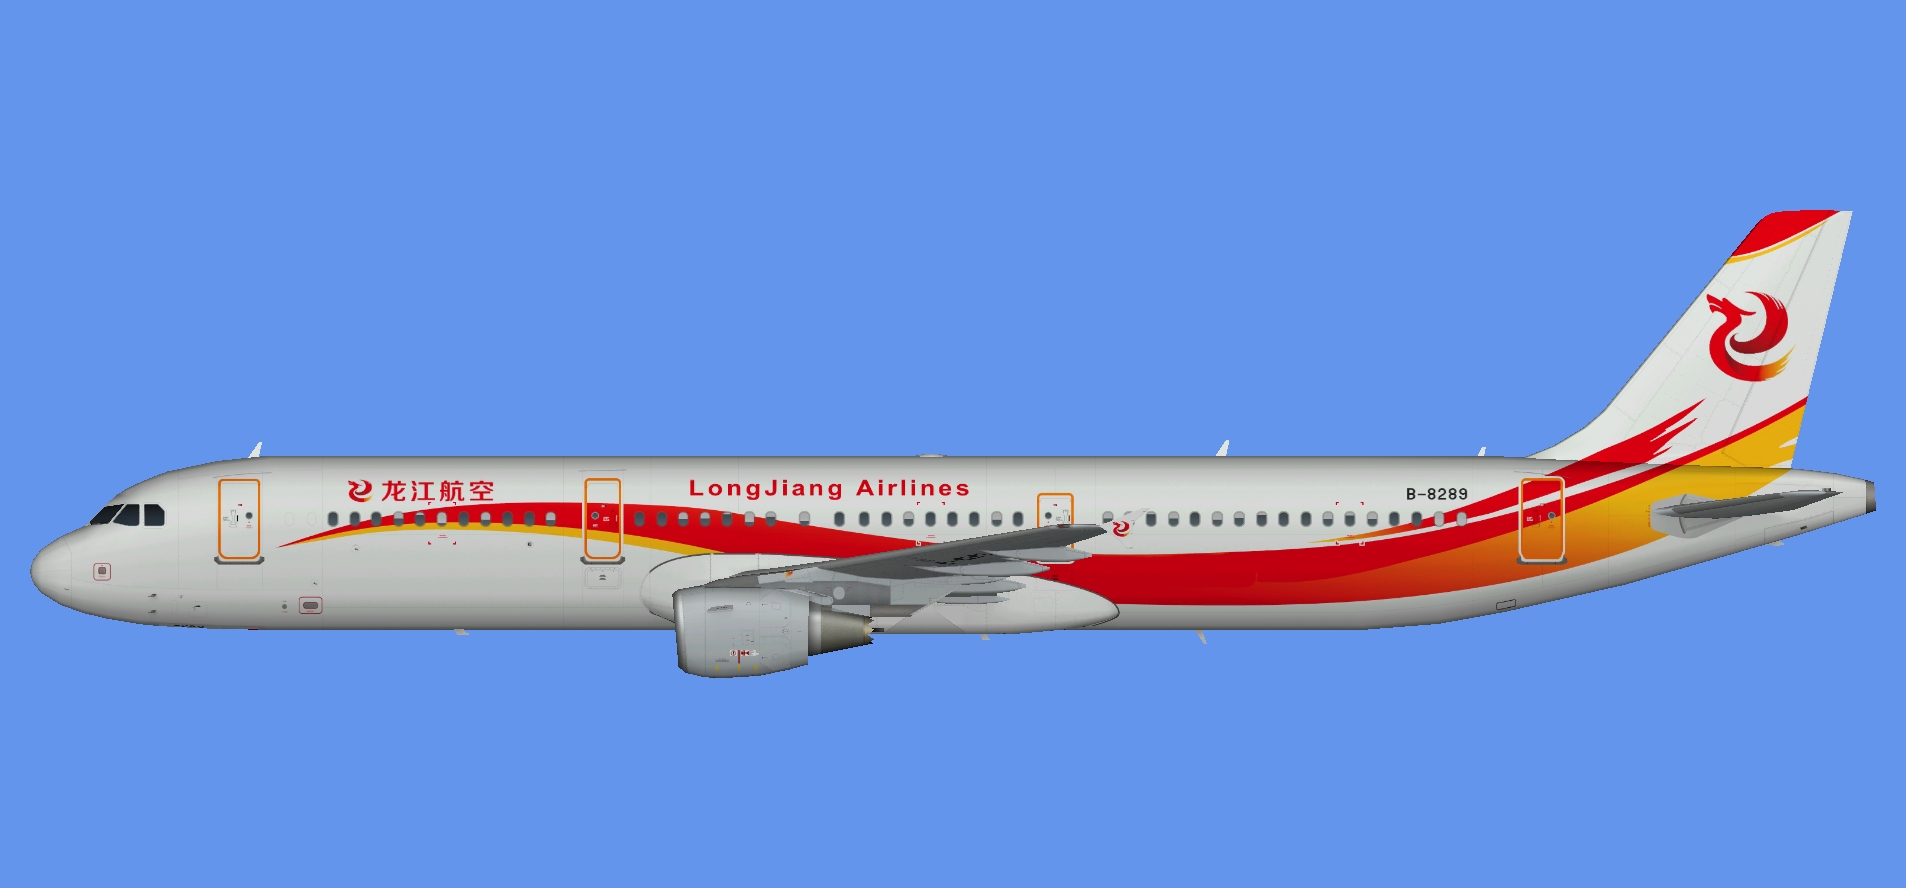 Longjiang Airlines Airbus A321